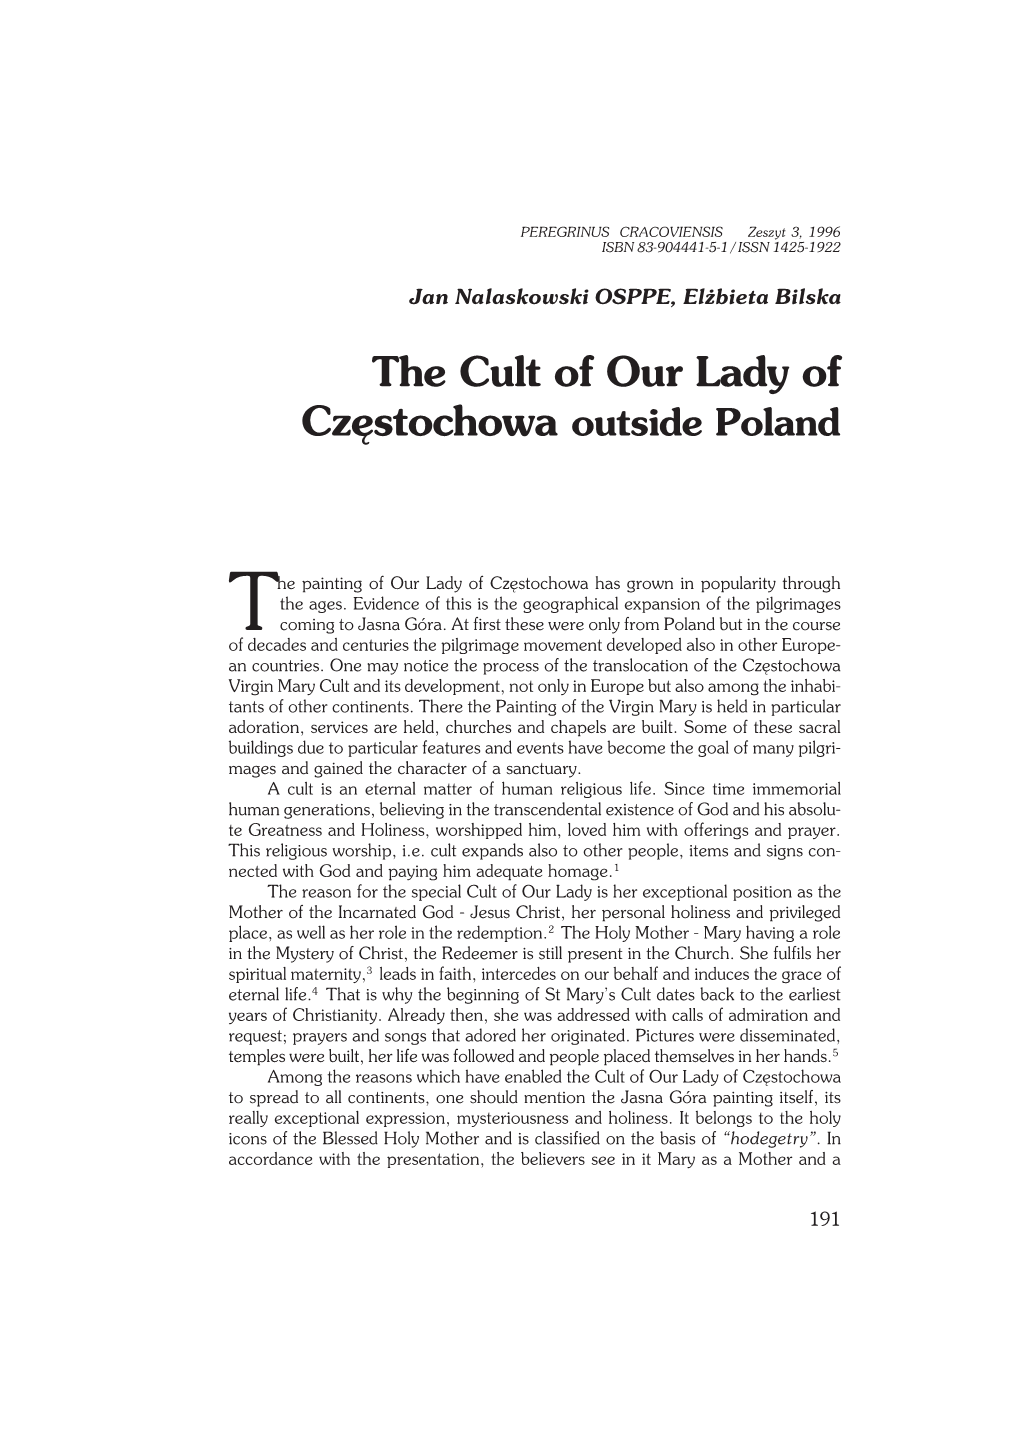 The Cult of Our Lady of Częstochowa Outside Poland